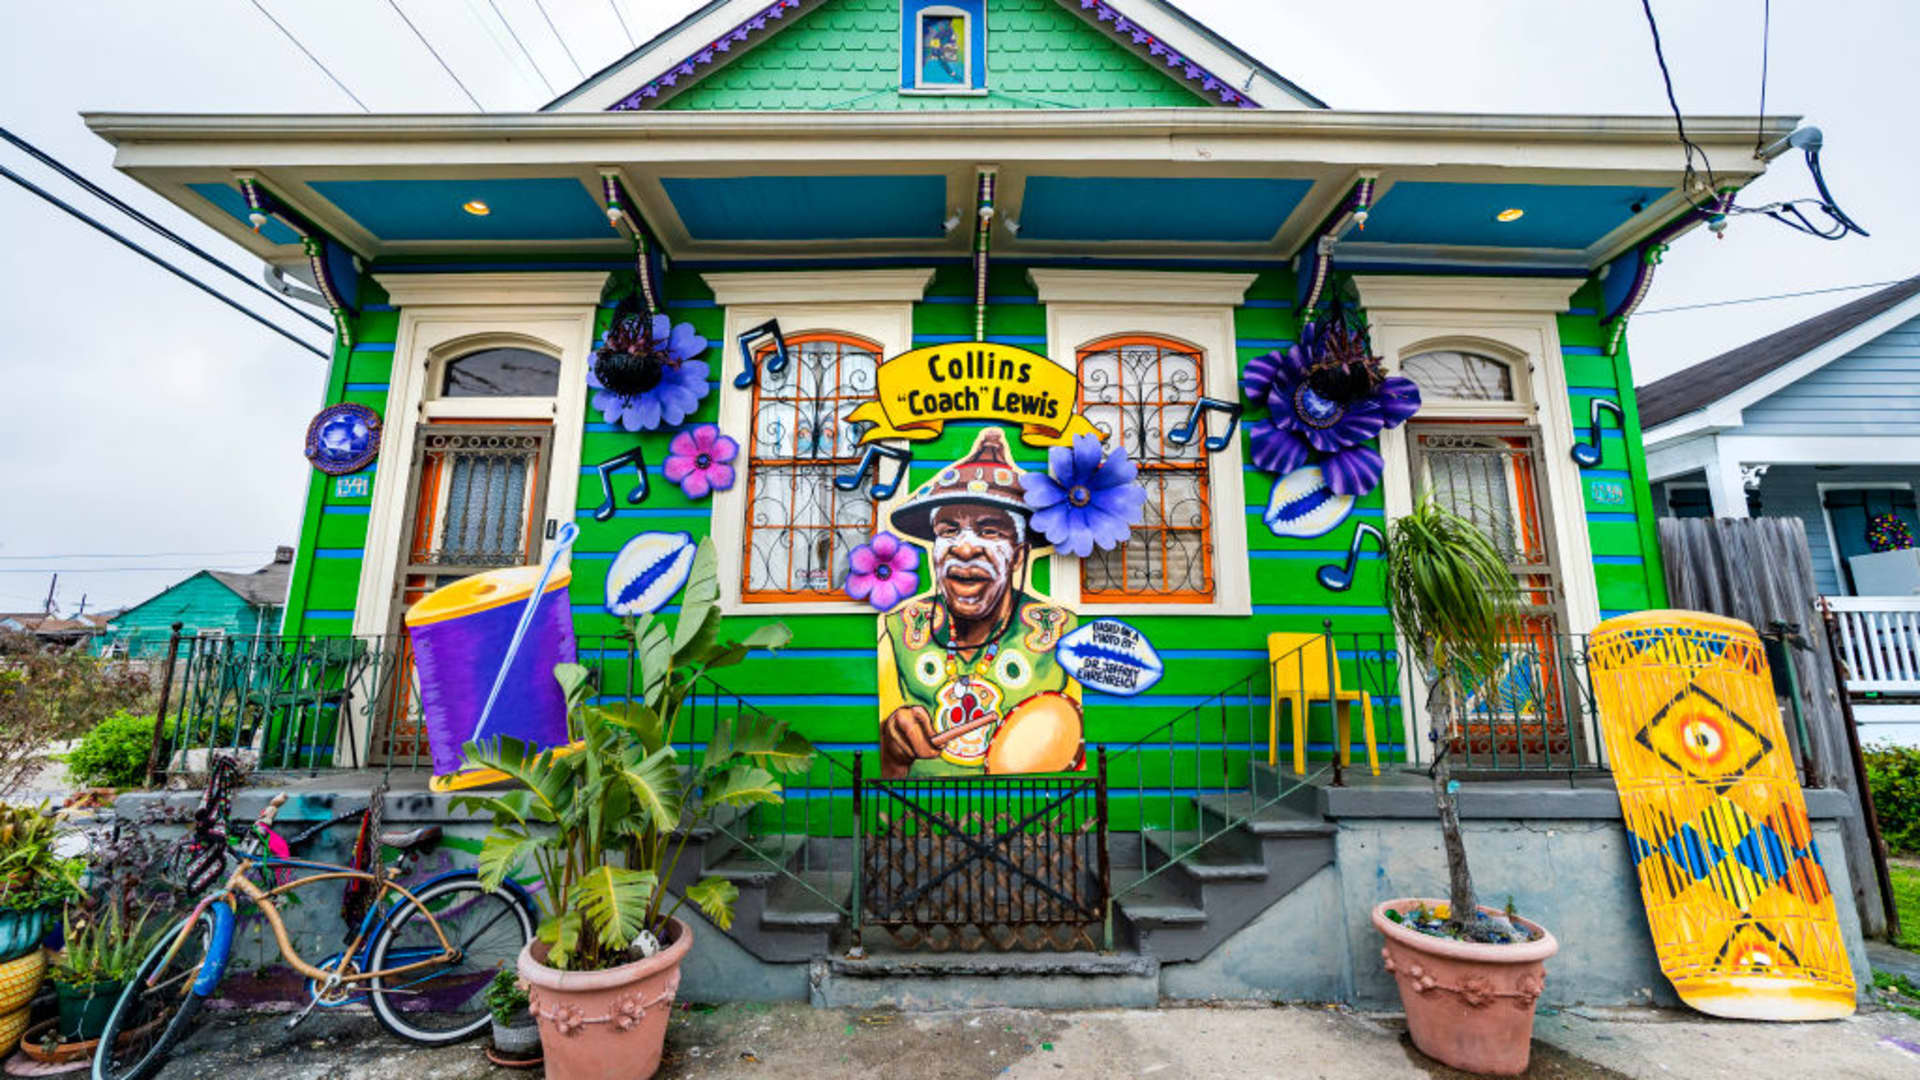 The Coach Lewis House, whose decorations are sponsored by Krewe of Red Beans, honors the life of the 7th Ward Mardi Gras Indian on February 15, 2021 in New Orleans, Louisiana.